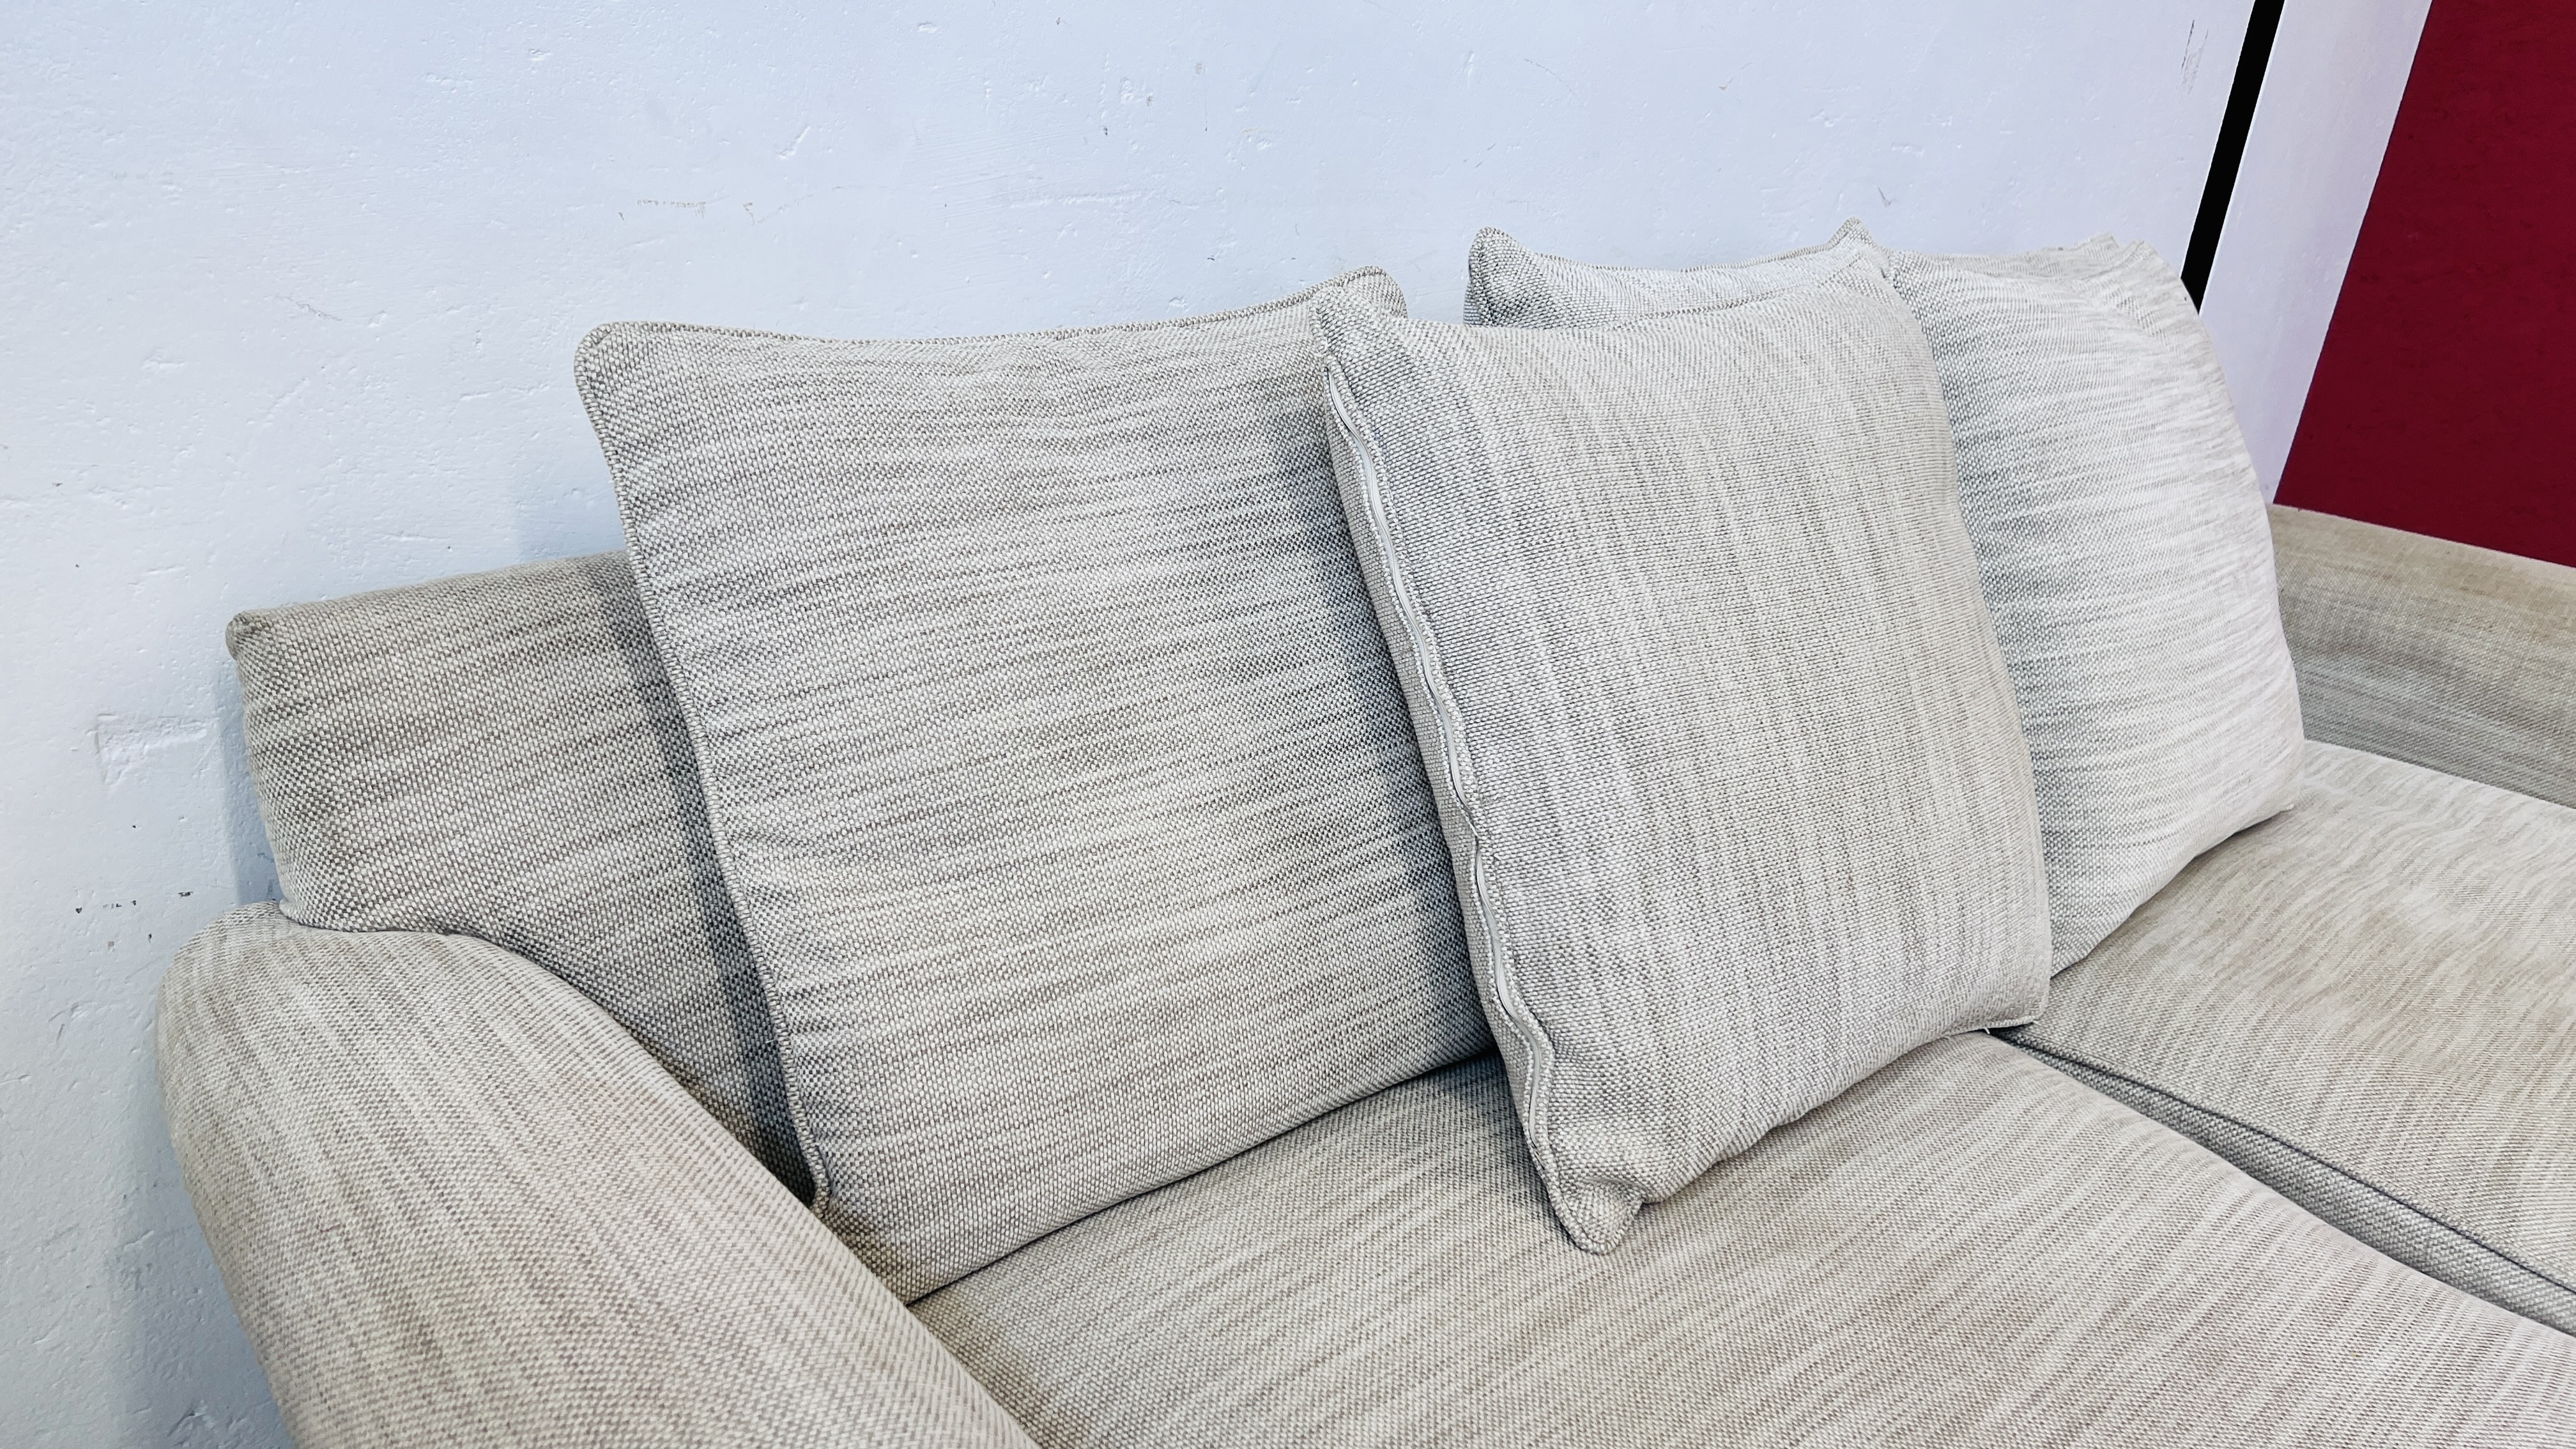 A PAIR OF "THE LOUNGE Co" OATMEAL UPHOLSTERED SOFA'S EACH LENGTH 210CM. - Image 8 of 22